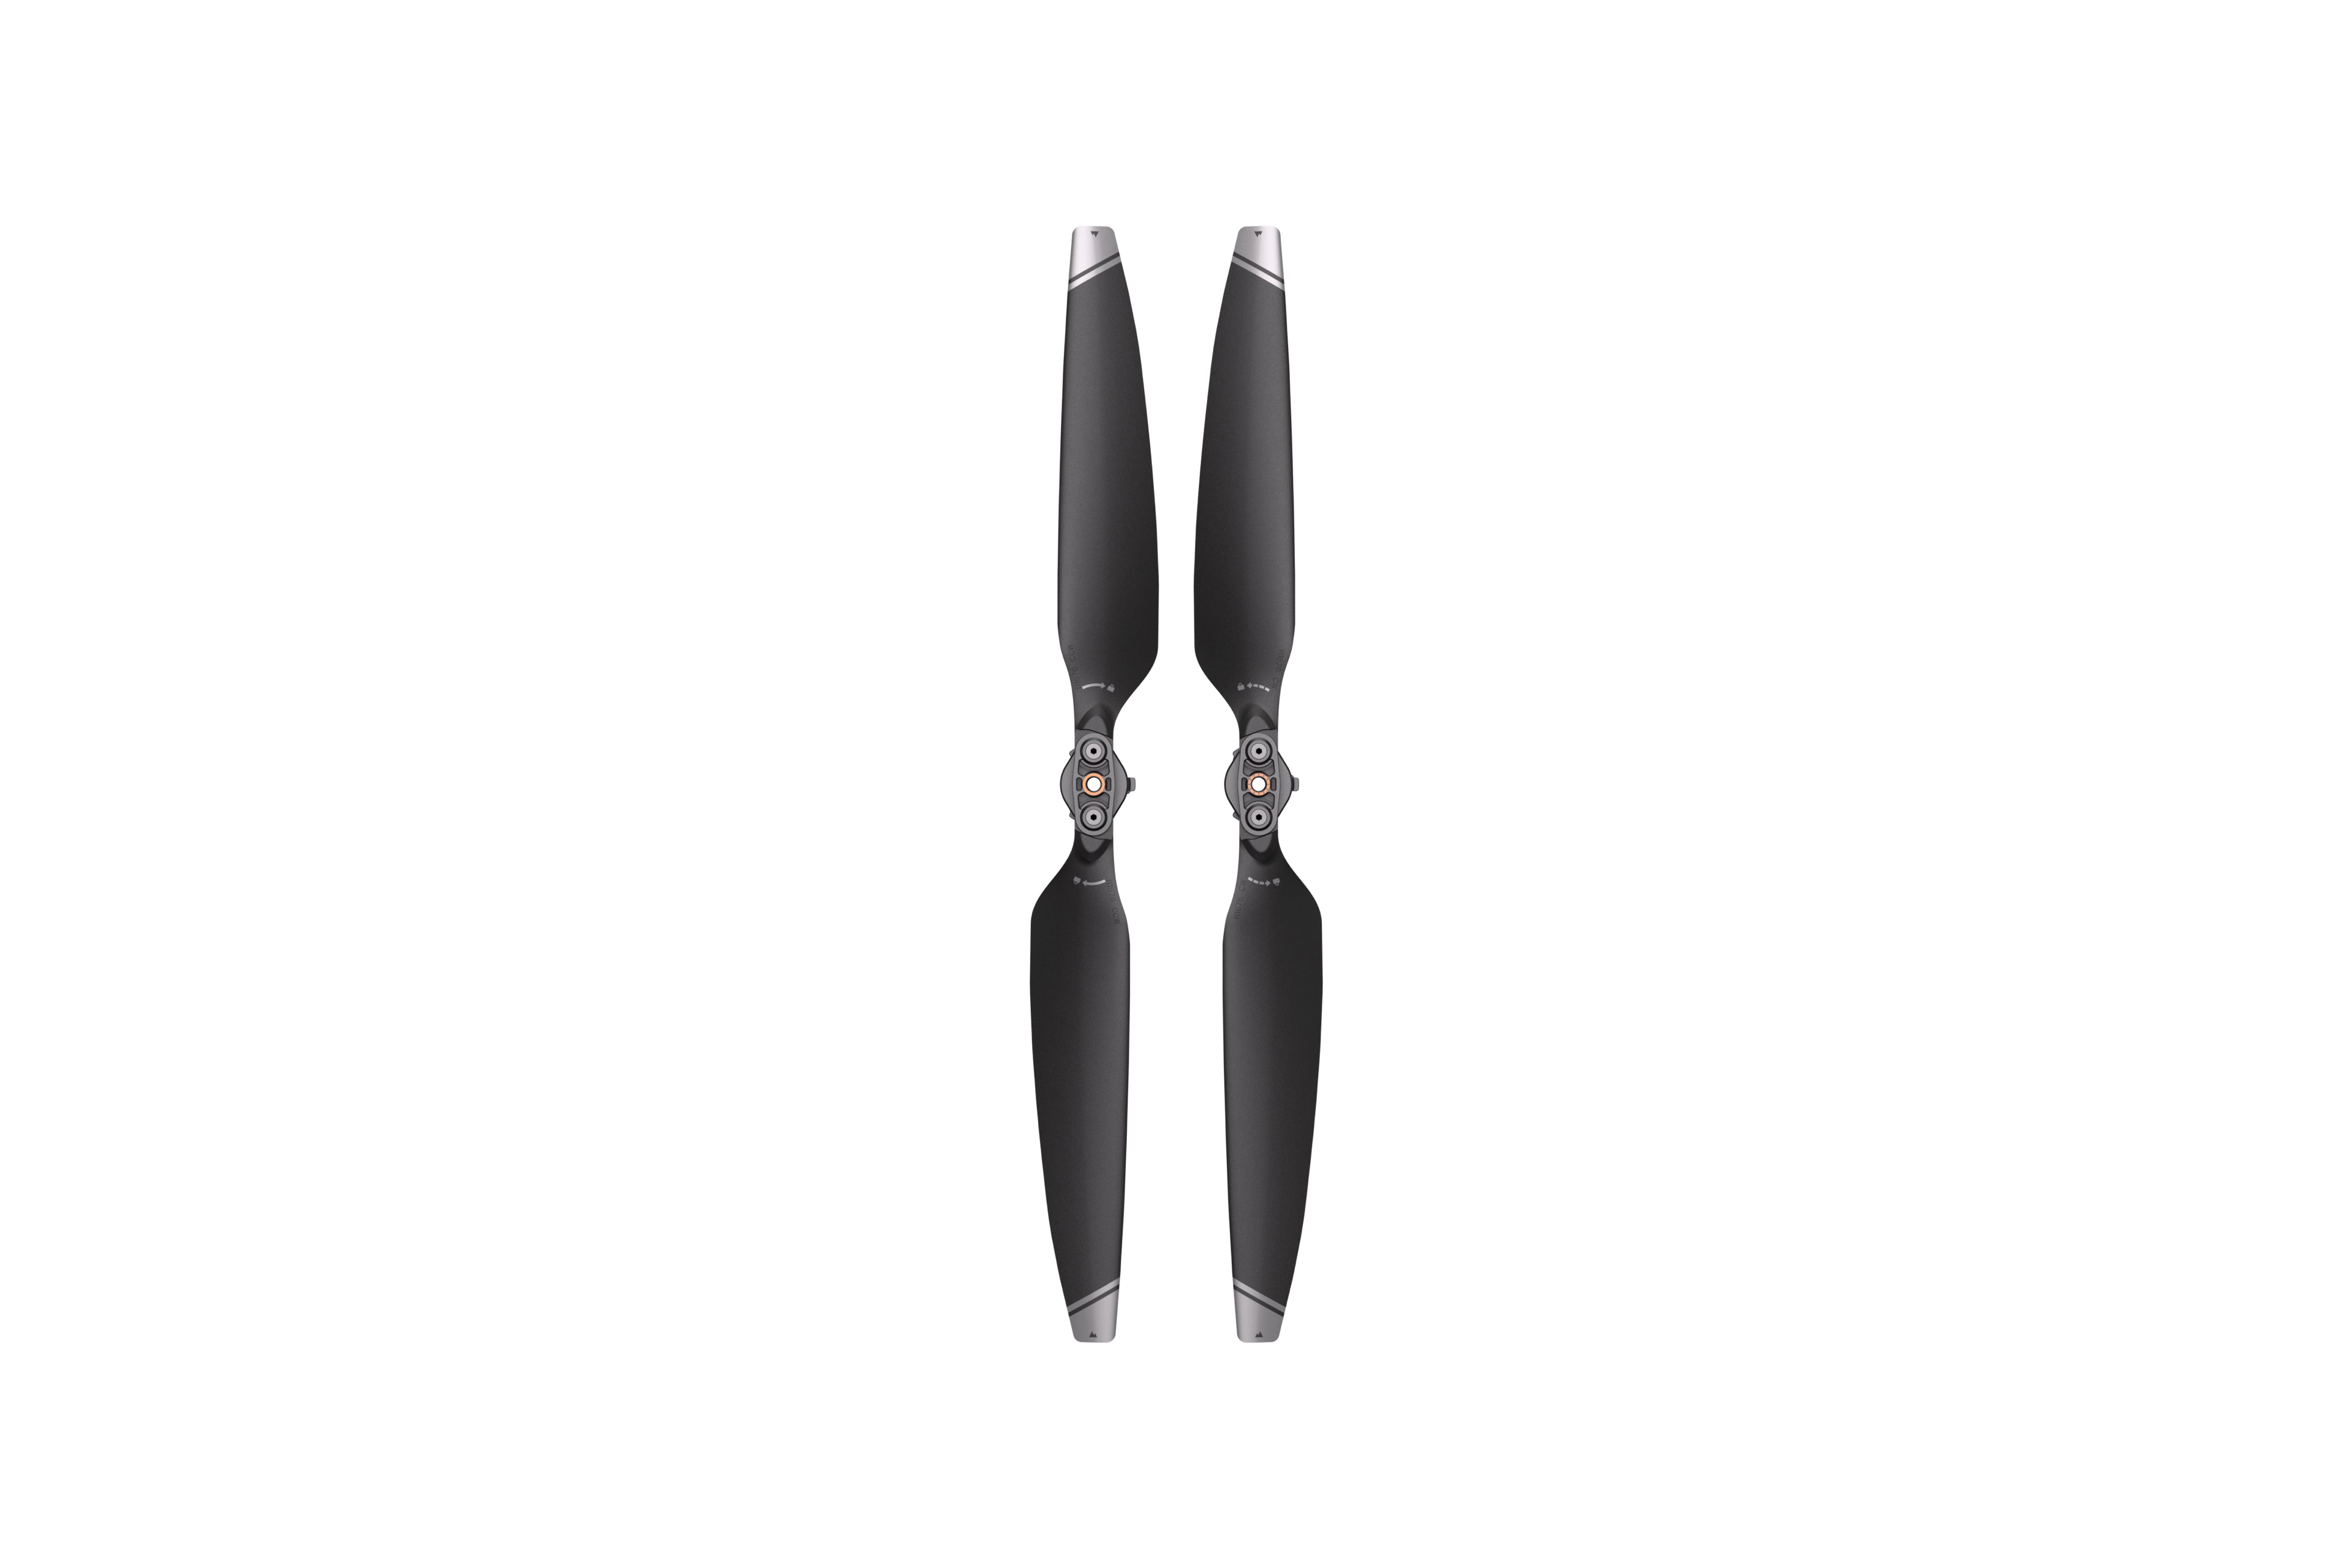 DJI Inspire 3 Foldable Quick-Release Propellers for High Altitude (Pair) DJI Florida Drone Supply DJI Inspire 3 Foldable Quick-Release Propellers for High Altitude (Pair)